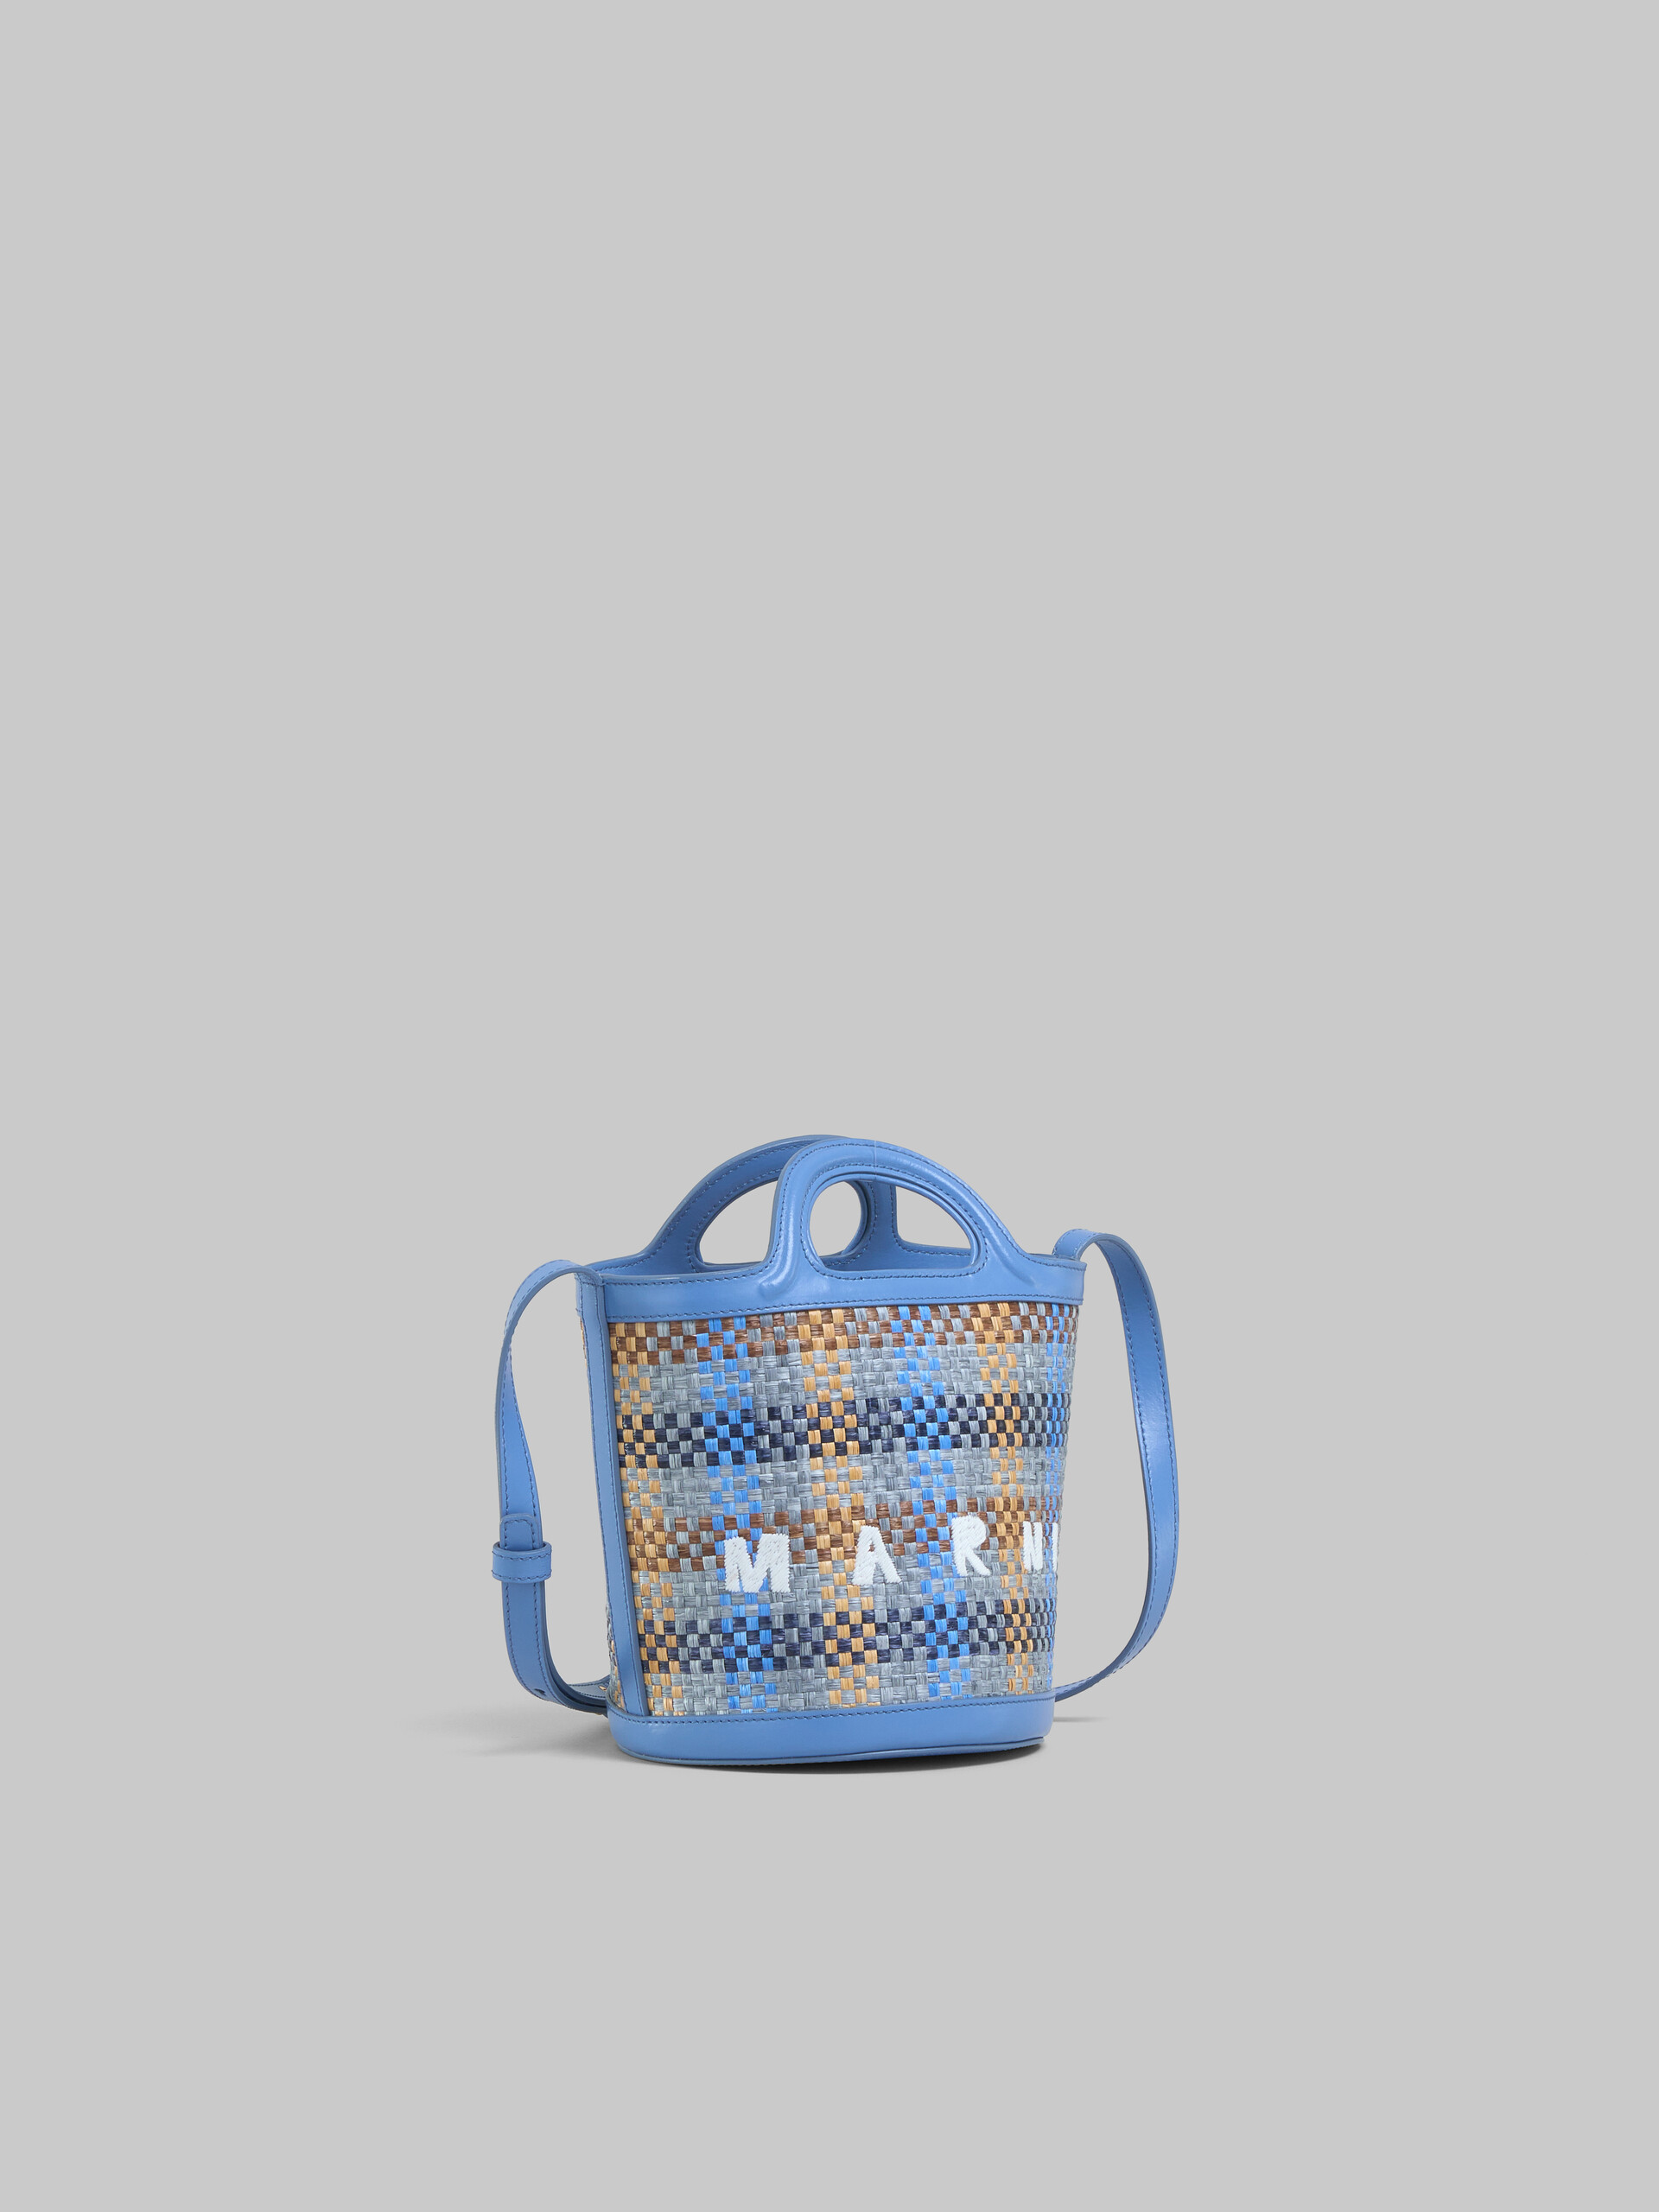 Tropicalia small bucket bag in brown leather and checked raffia-effect fabric - Shoulder Bags - Image 6